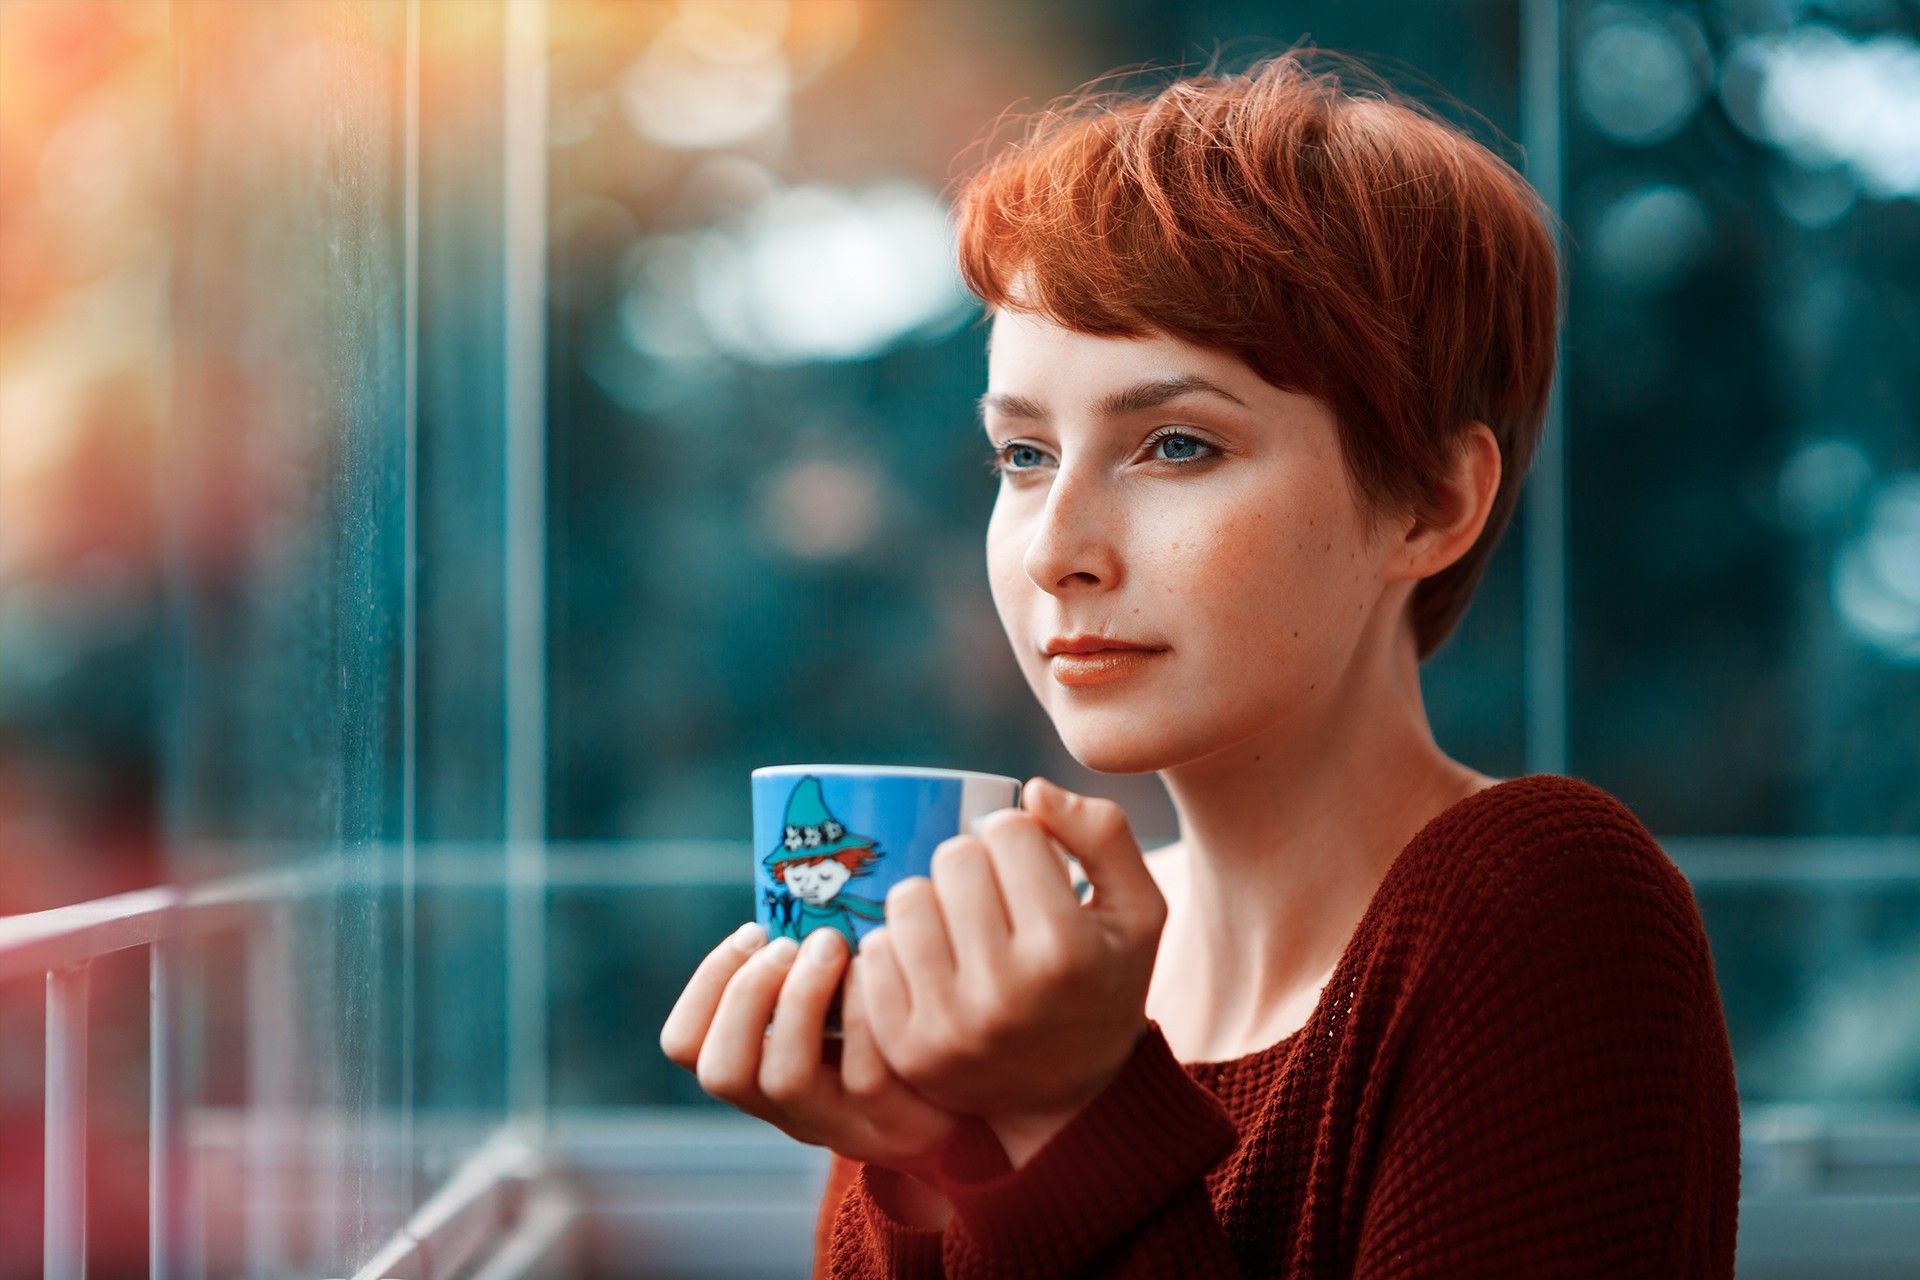 A girl with short hair drinking coffee wallpaper and image